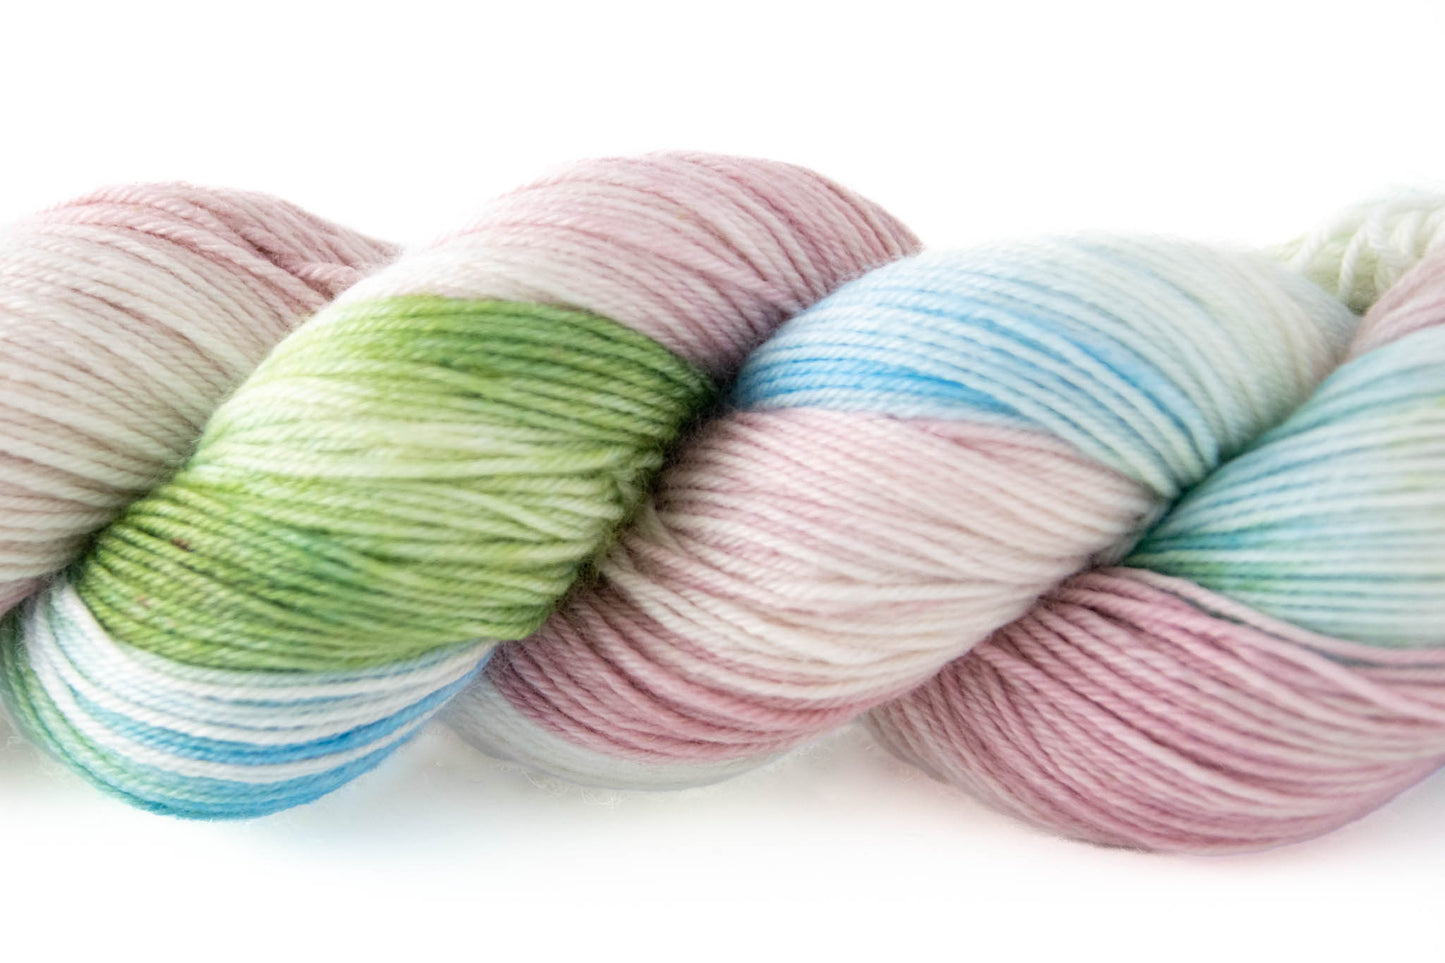 Closeup of the variegated texture of the pink, green, blue, and white hand-dyed wool yarn.